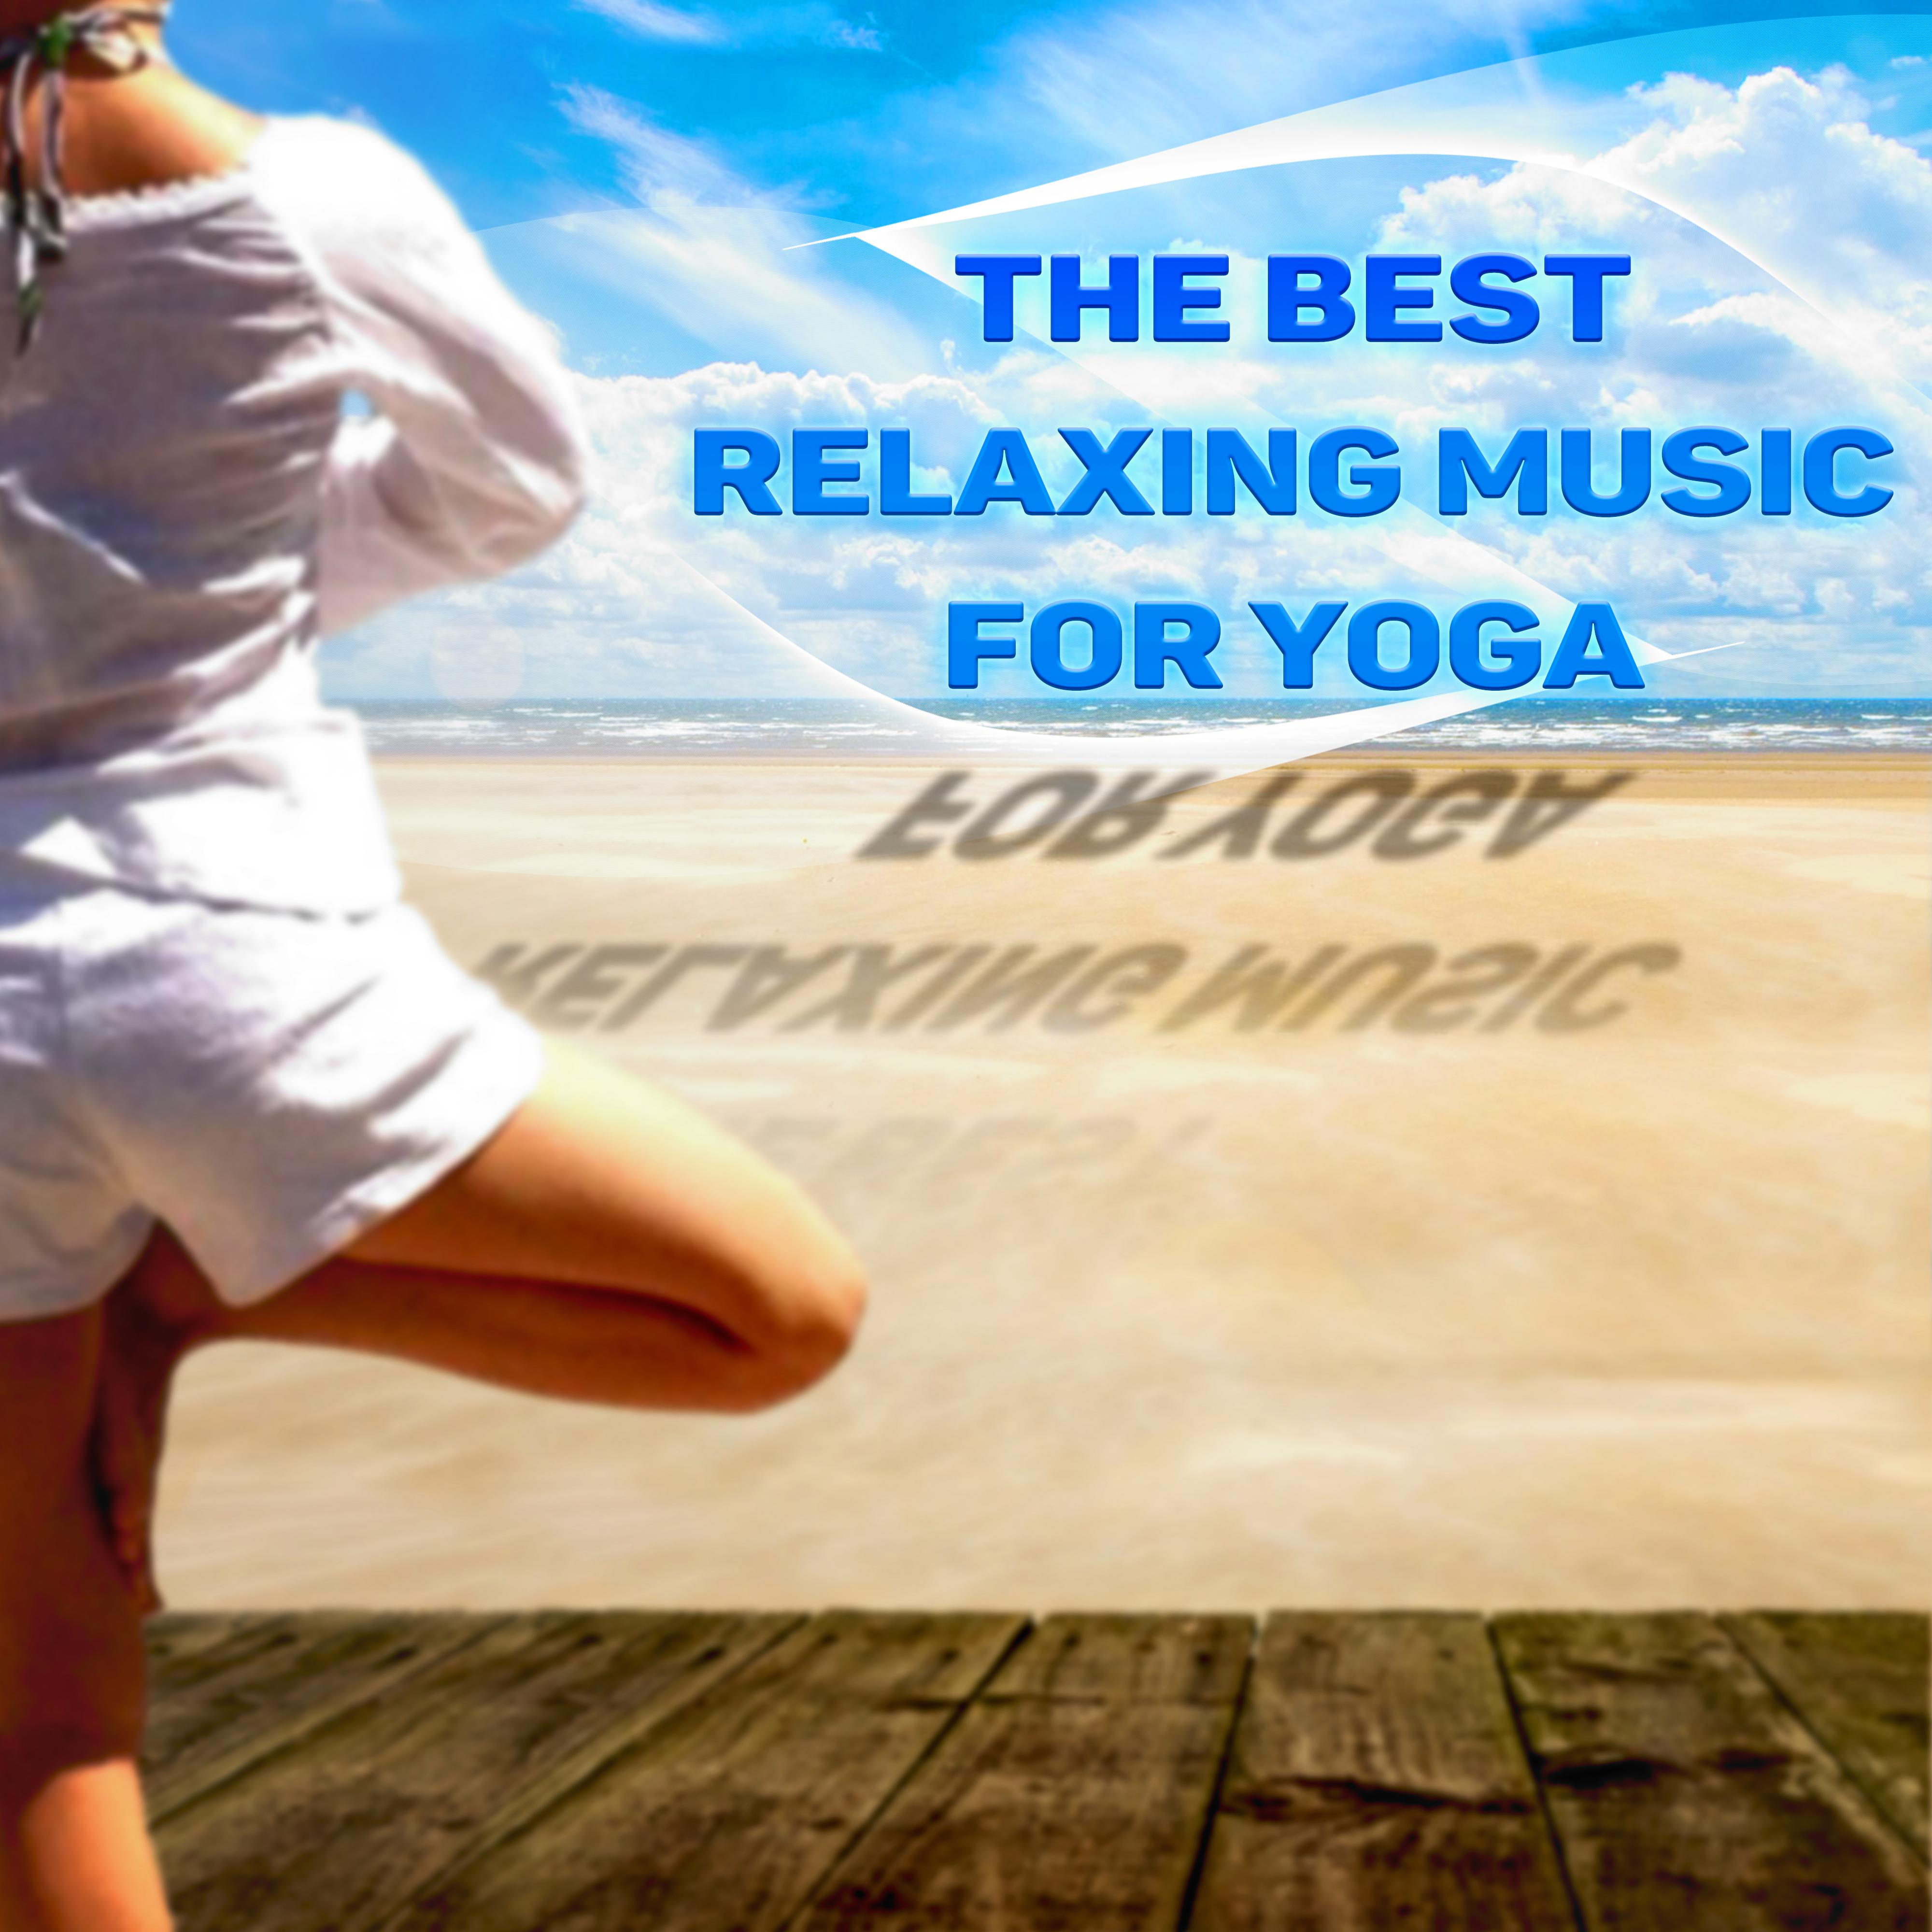 The Best Relaxing Music for Yoga - Yoga Music for Daily Exercise, Deep Breath, Good Health, Healthy Body, Free Spirit, Stress Relief, Control Anger, Stop Worrying, Well Being